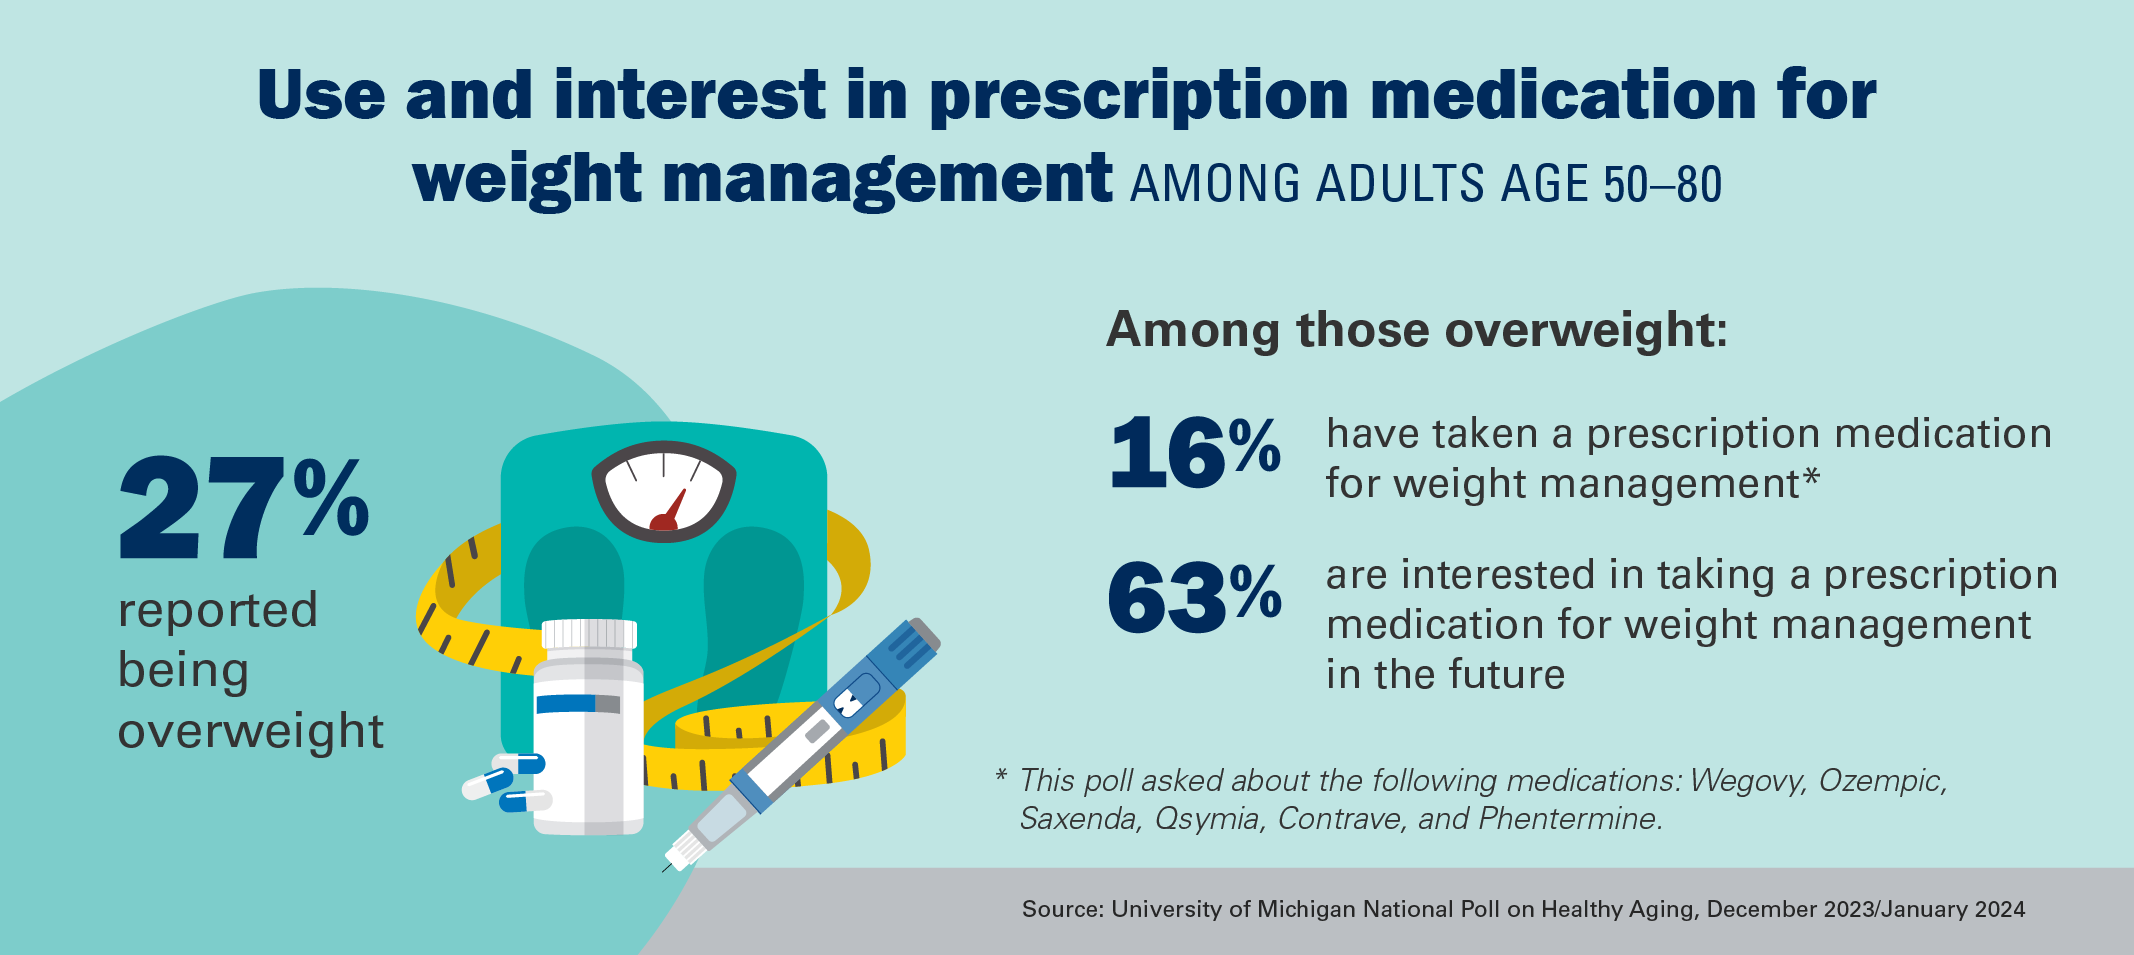 Use and interest in prescription medication for weight management among adults age 50-80